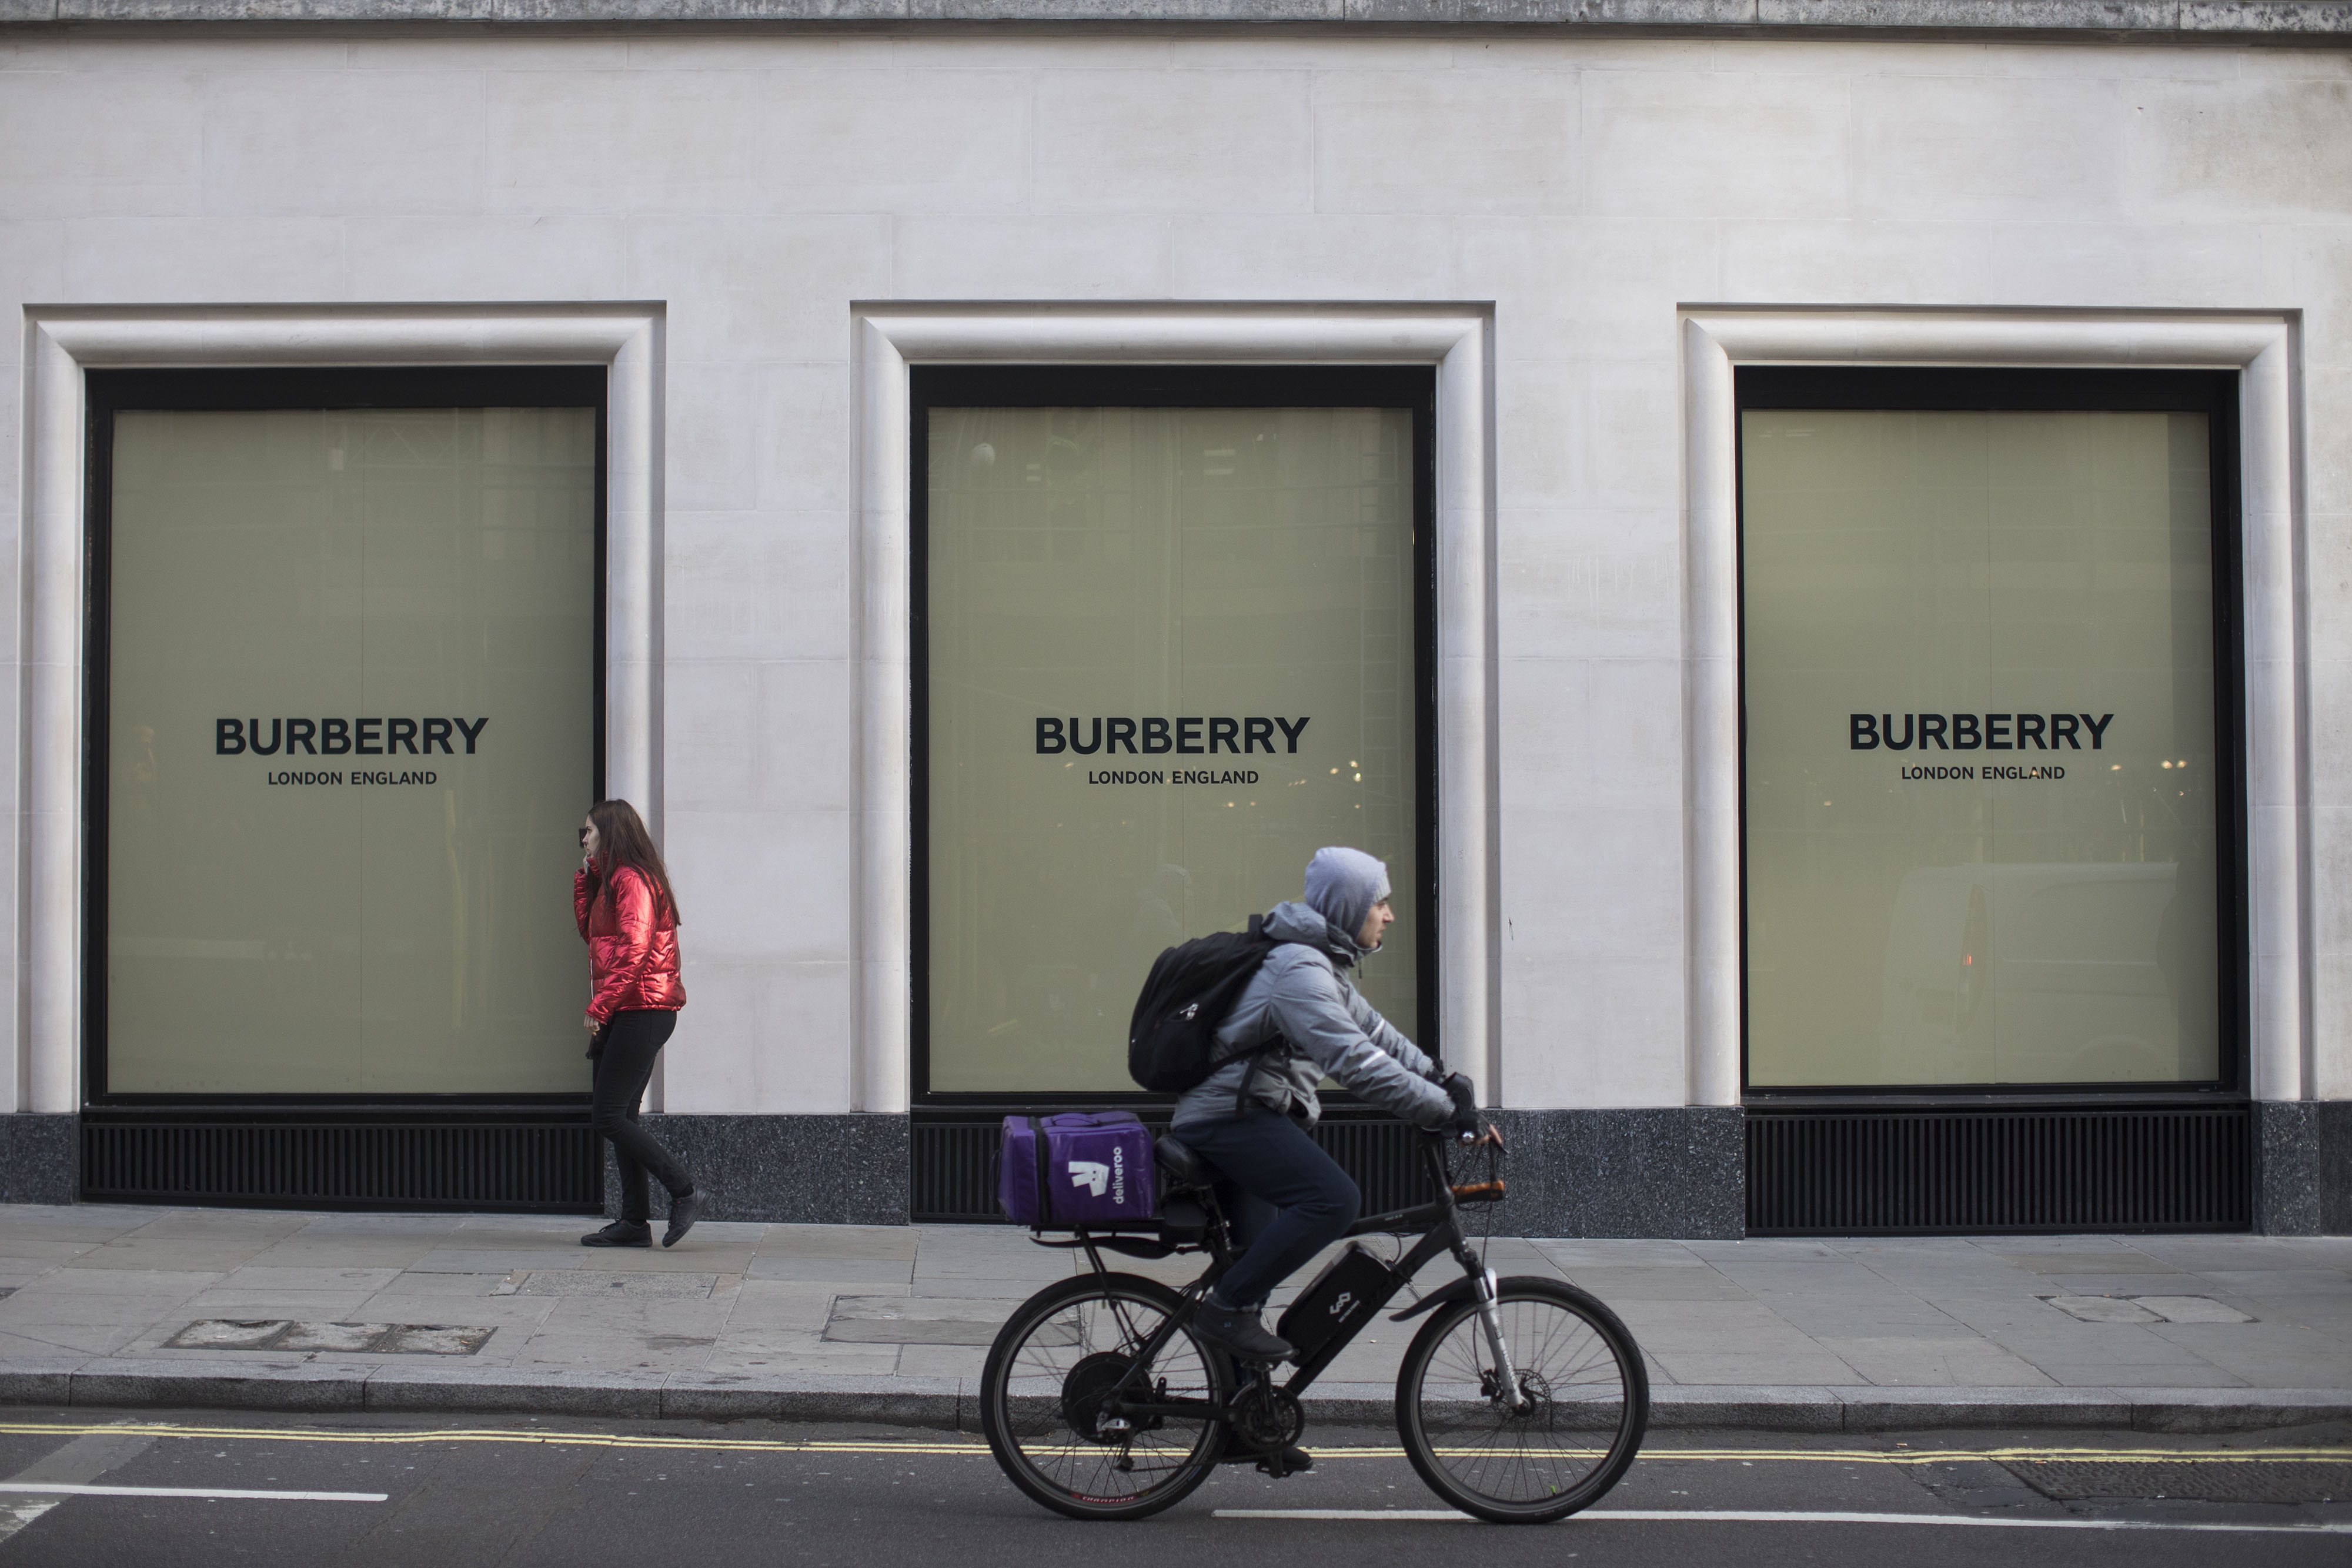 Burberry Warehouse Workers Were 